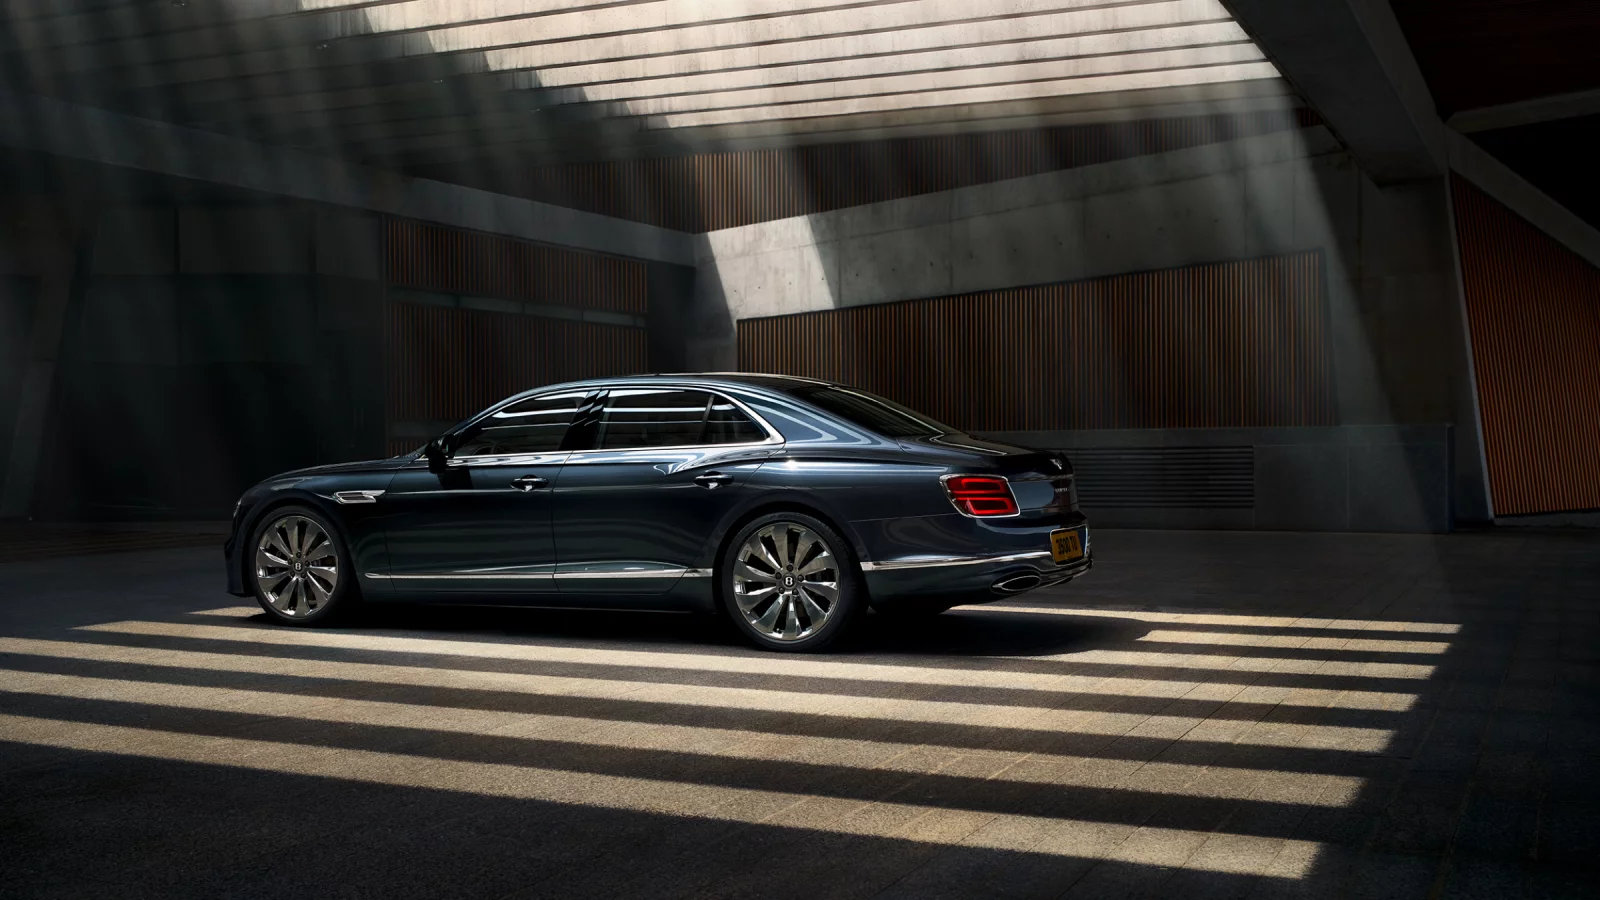 Bentley Flying Spur 1 by Marc TRAUTMANN